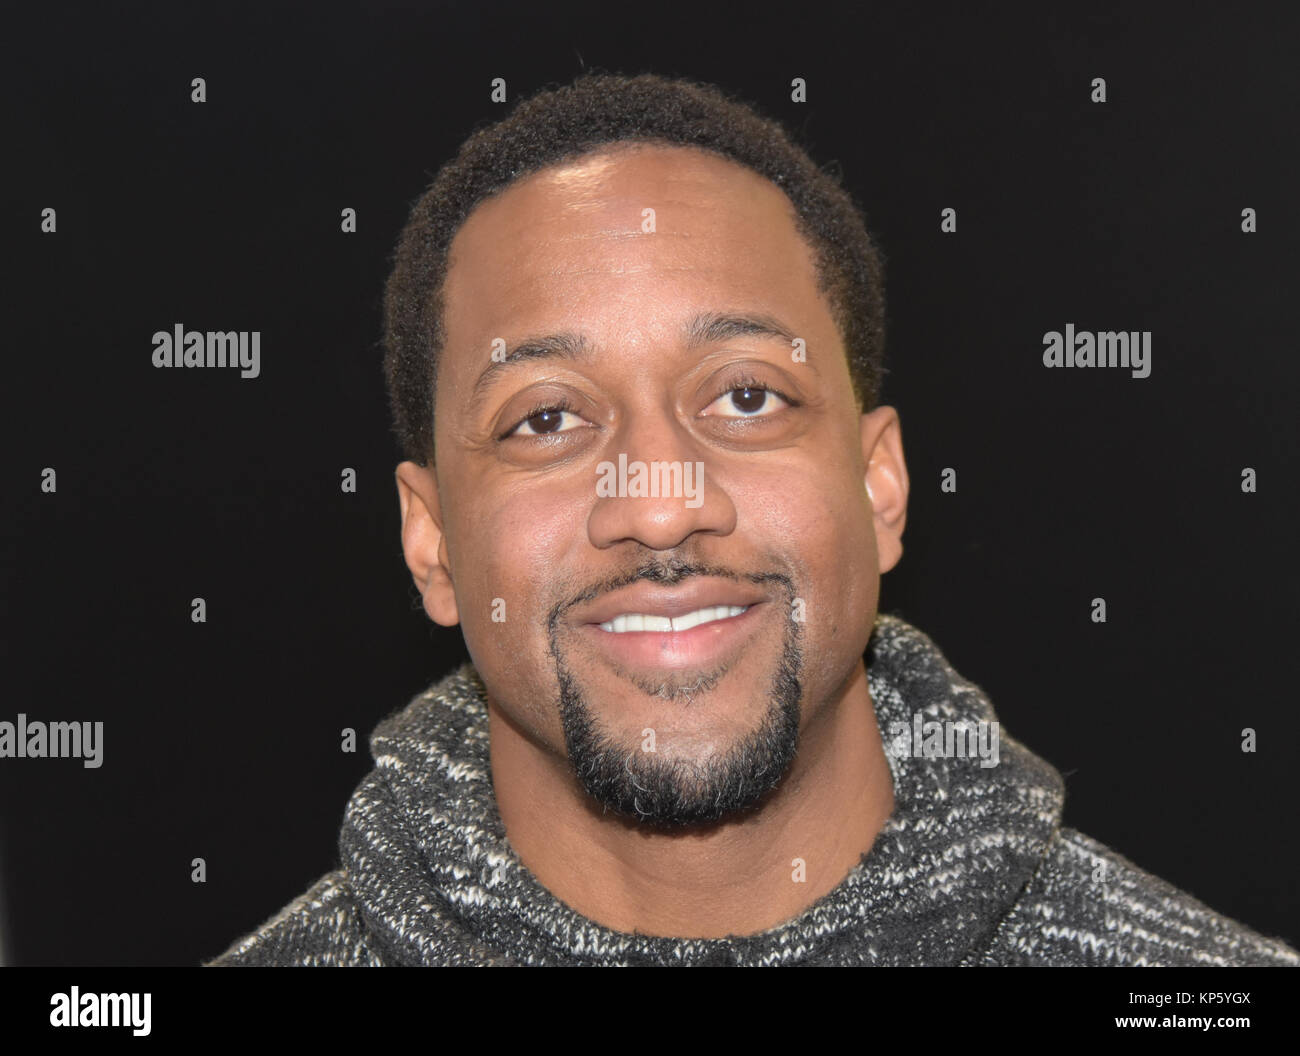 Dortmund, Germany - December 9th 2017: US Actor Jaleel White (* 1976, Steve Urkel on Family Matters, Dreamgirls, Boston Legal, House, Psych) at German Stock Photo